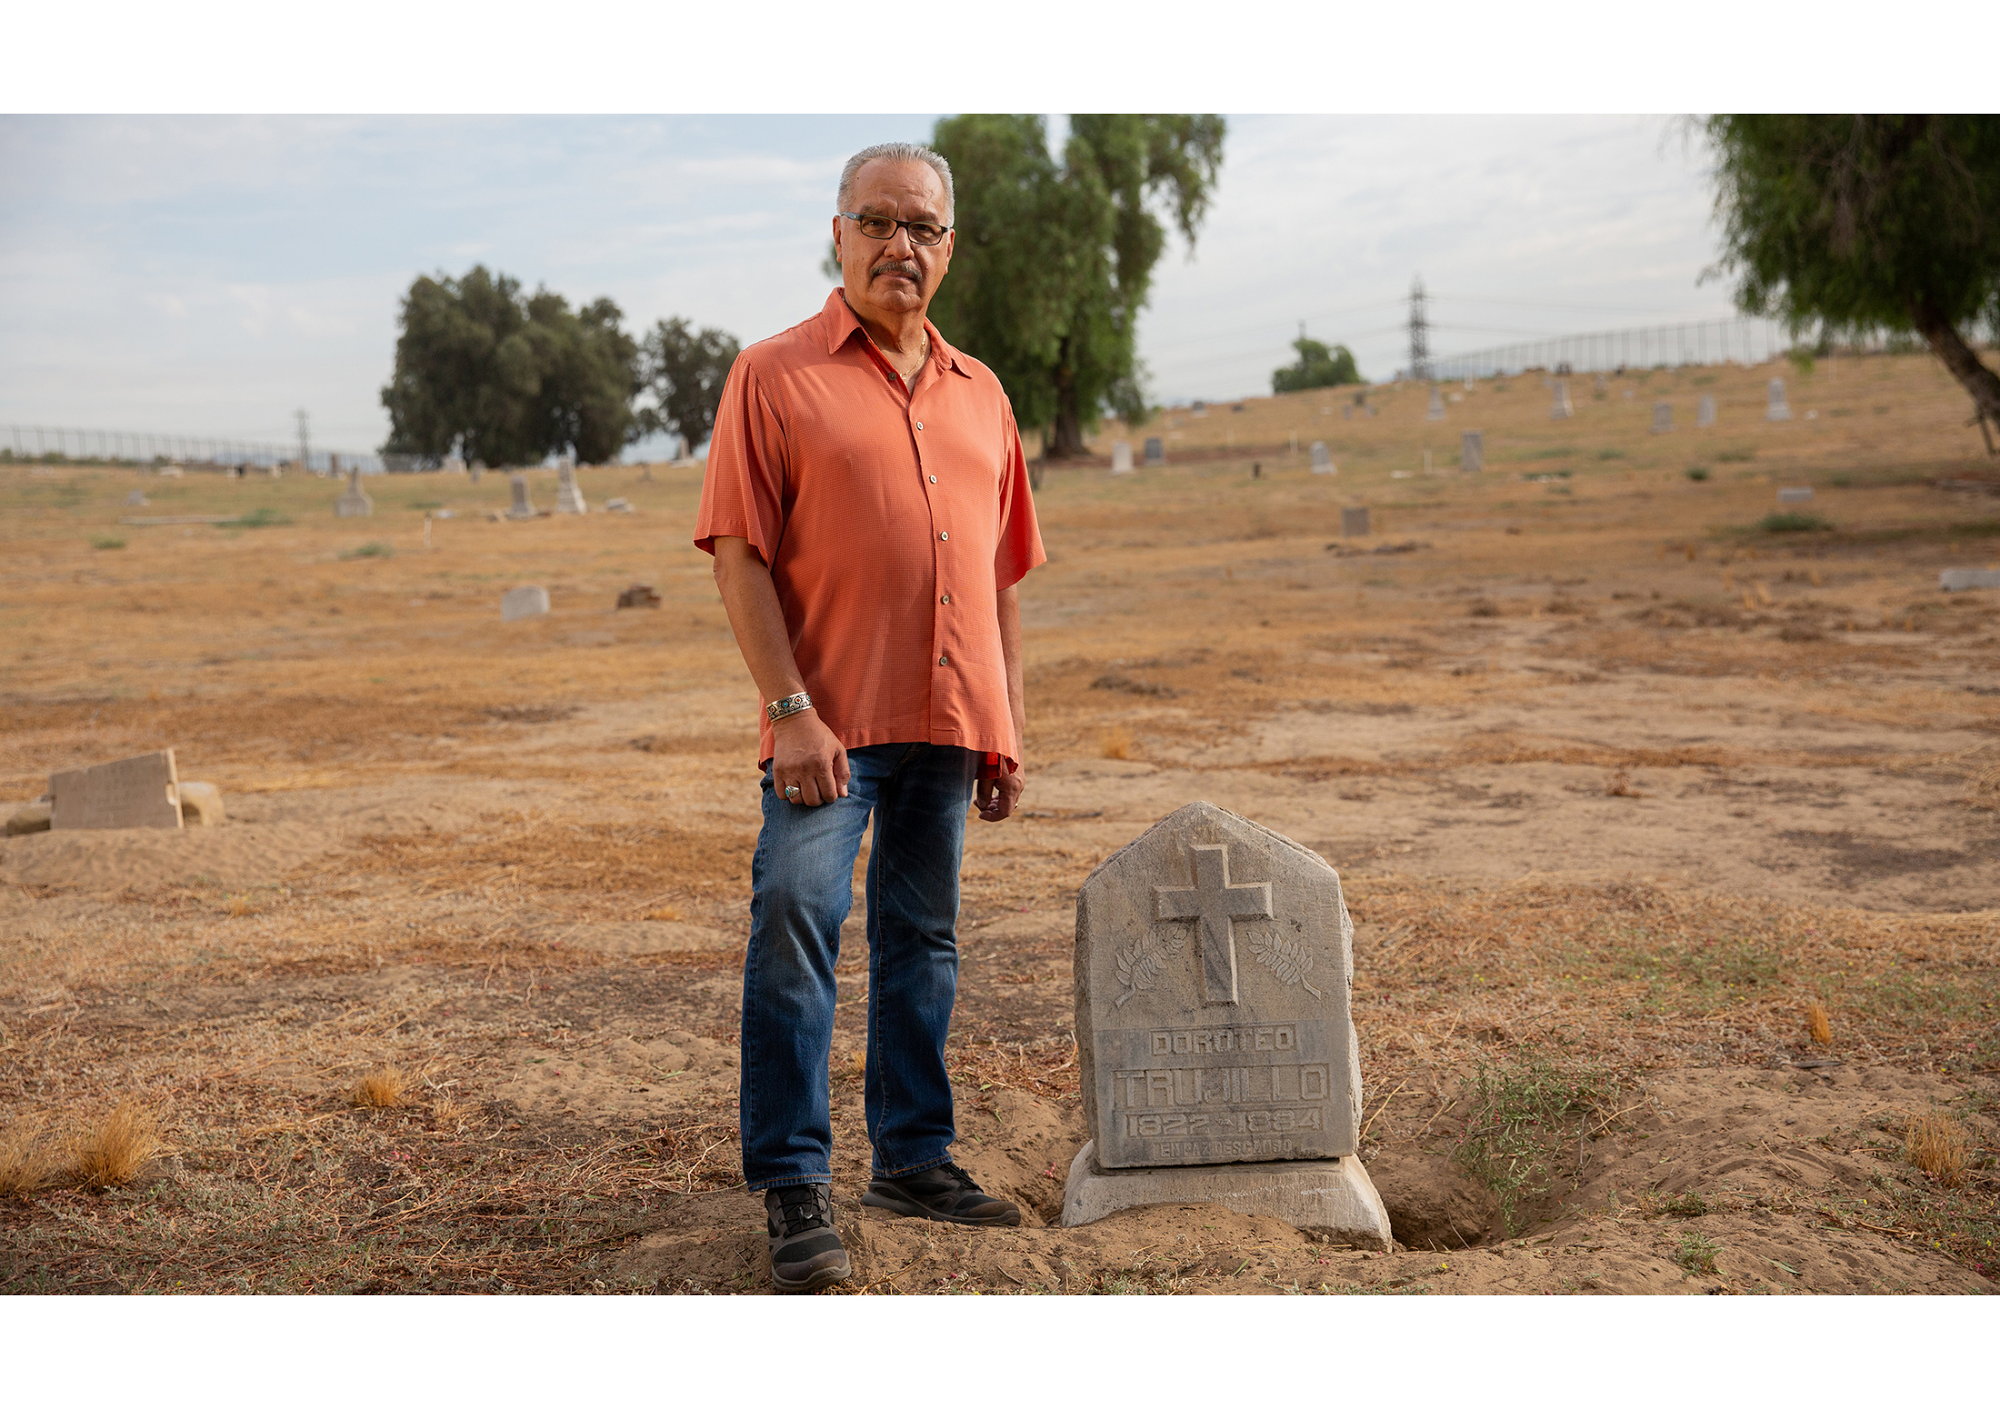 Latino genealogists use Google to search for their roots